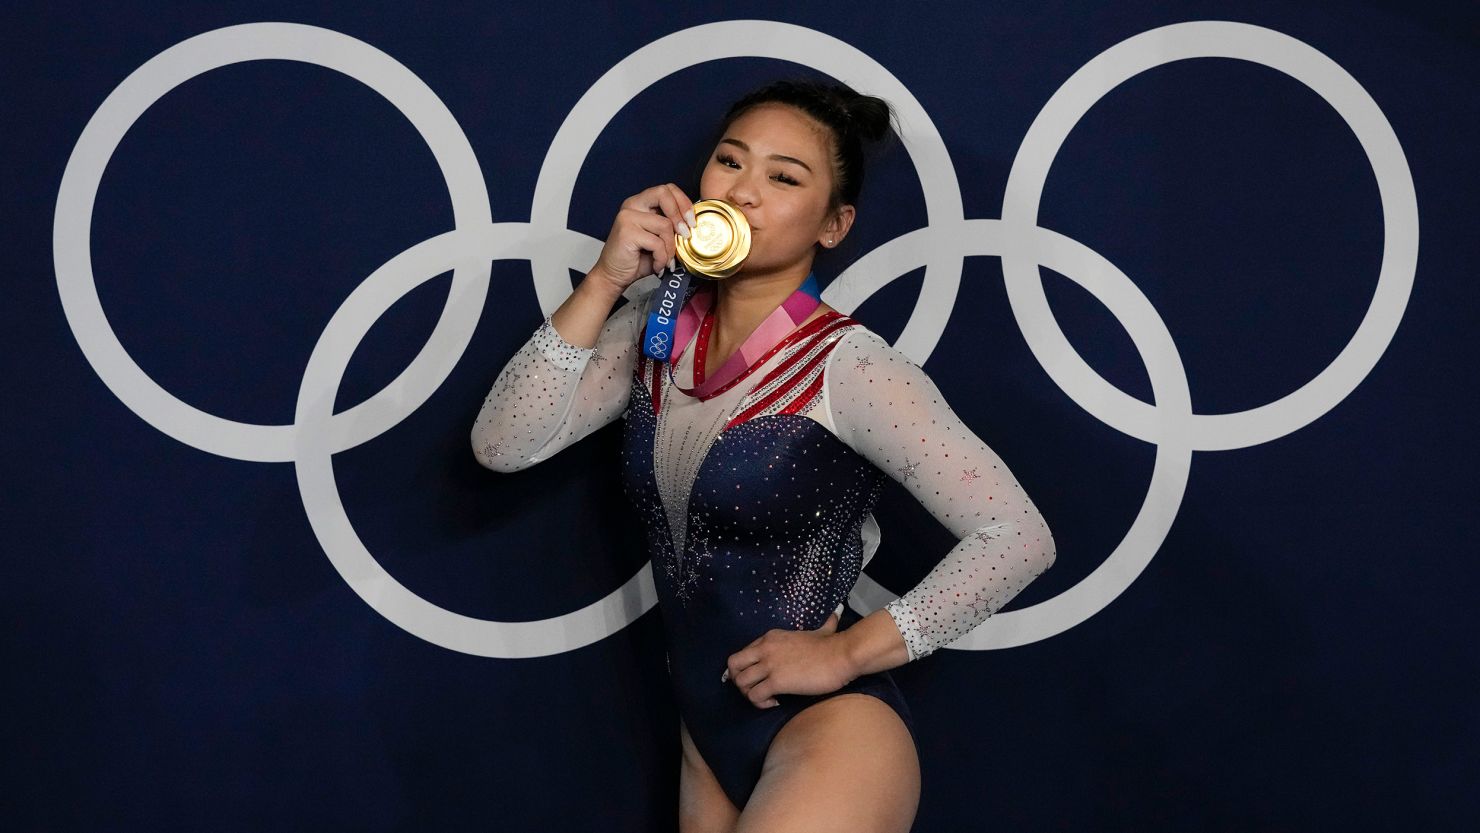 Sunisa Lee, of  the United States, reacts as she poses for a picture after winning the gold medal in the artistic gymnastics women's all-around final at the 2020 Summer Olympics, Thursday, July 29, 2021, in Tokyo, Japan. 